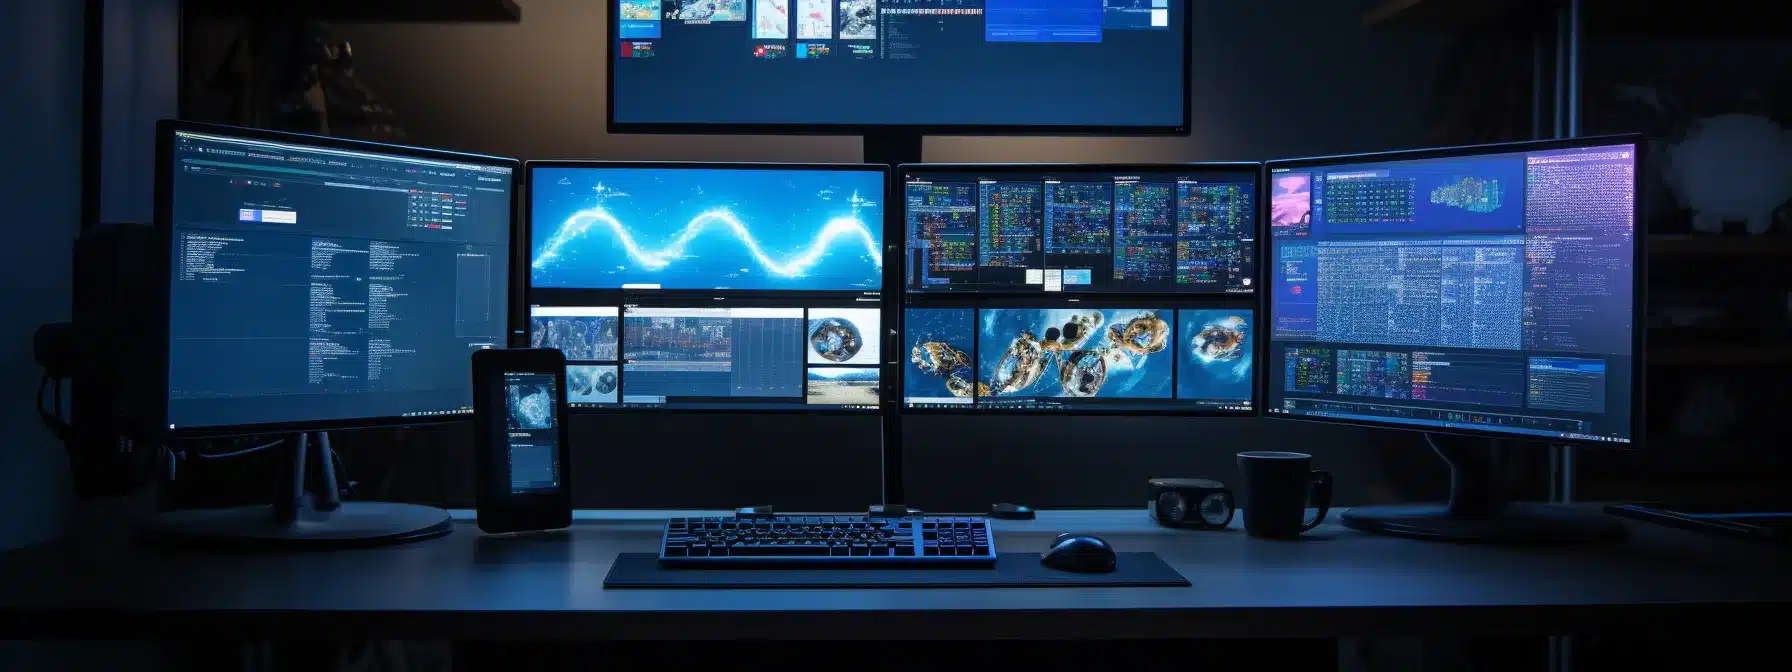 A Person At A Computer Desk Surrounded By Various Screens Displaying Social Media Profiles And Analytics.